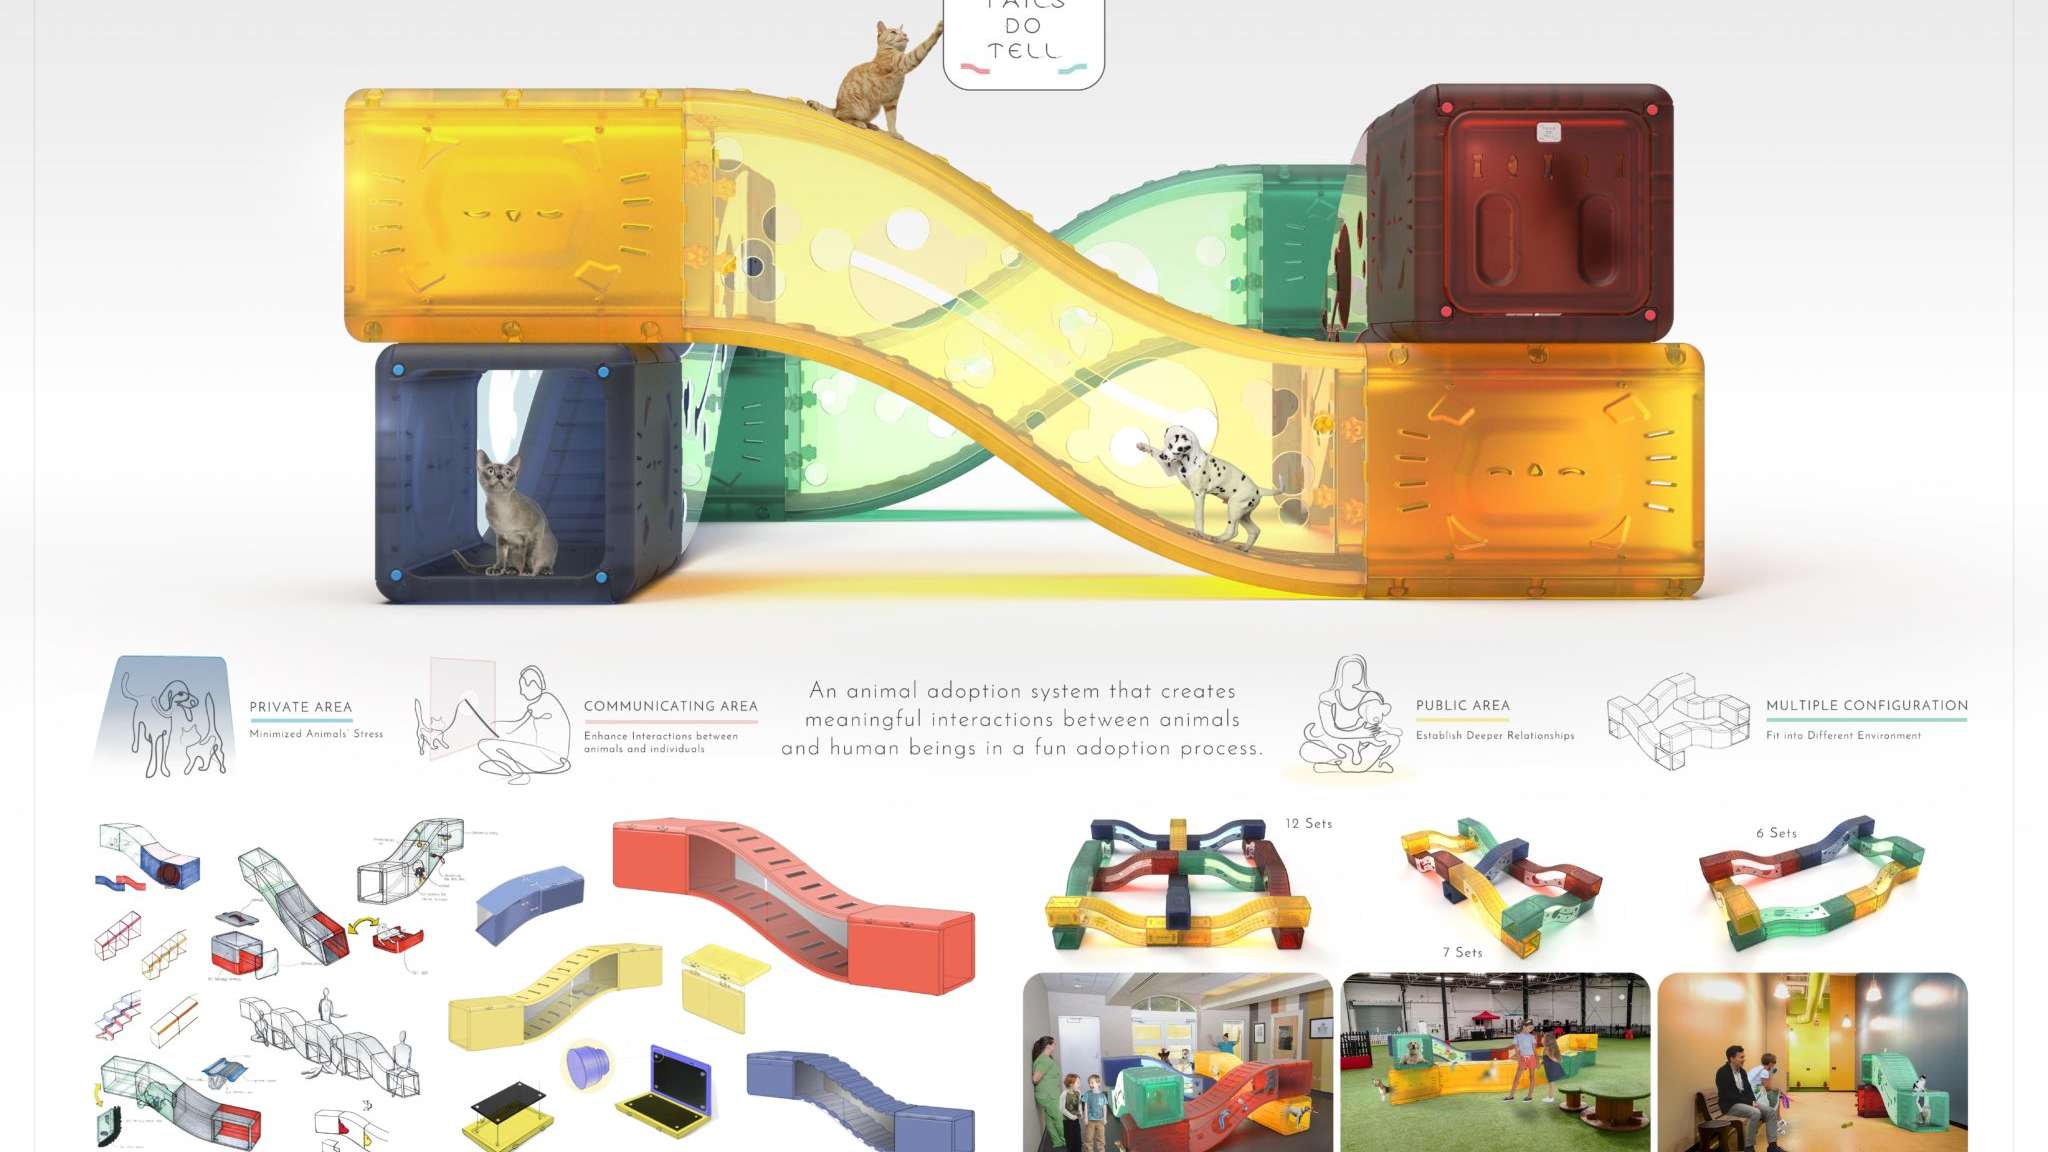 A play structure for cats and dogs by Industrial Design student Qing Guo